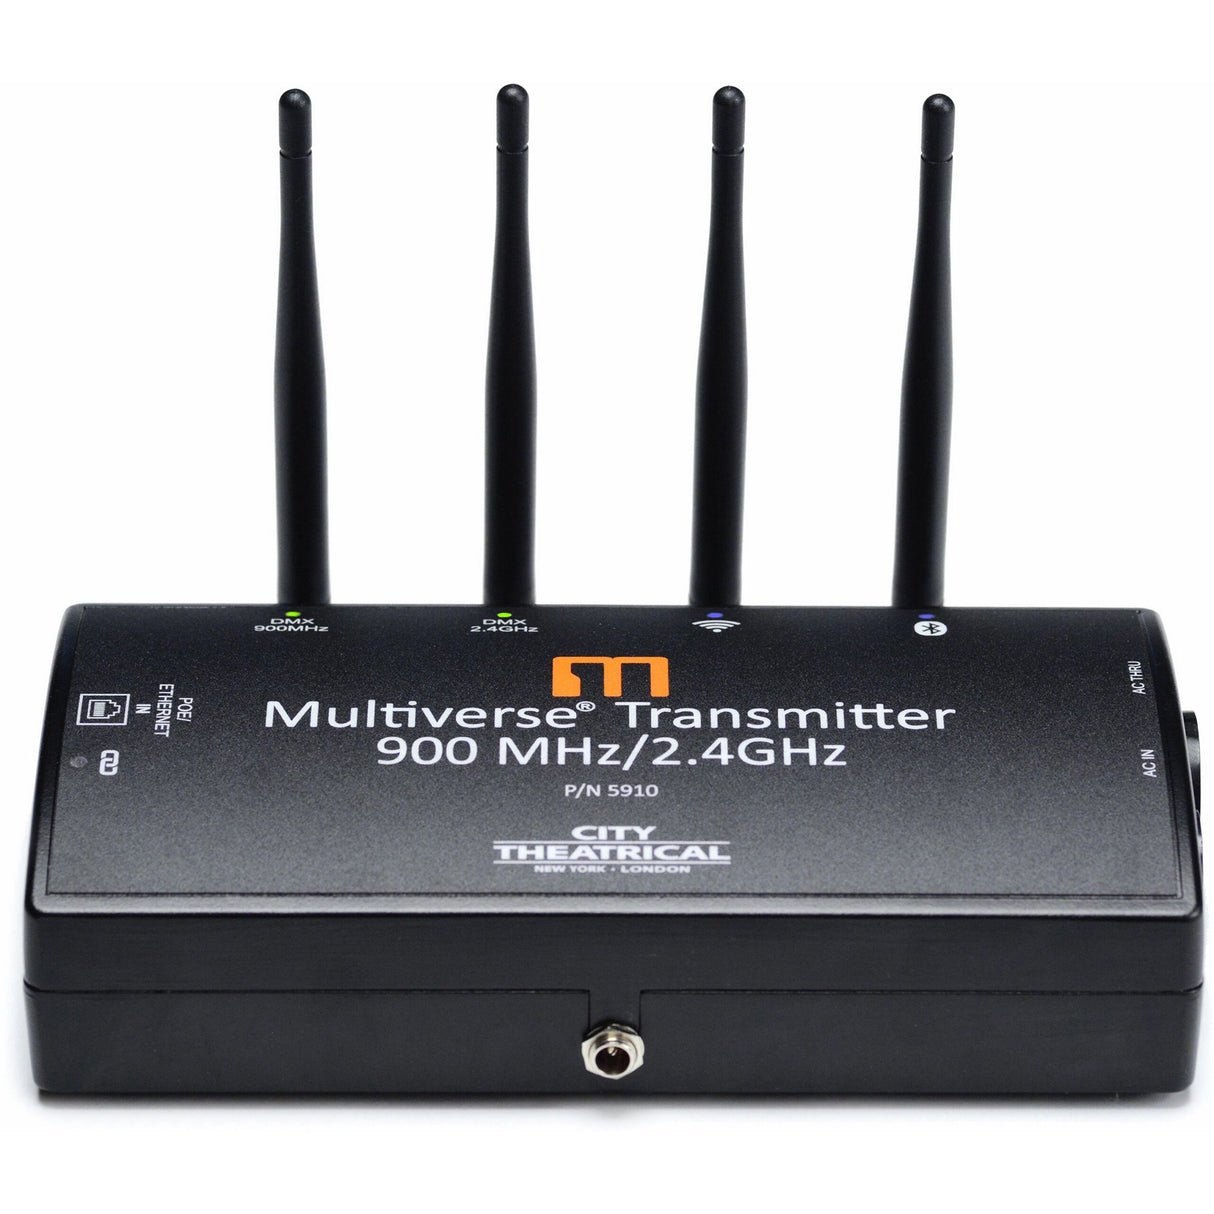 City Theatrical 5910 Wireless DMX Multiverse Transmitter, 900MHz/2.4GHz, NA Only